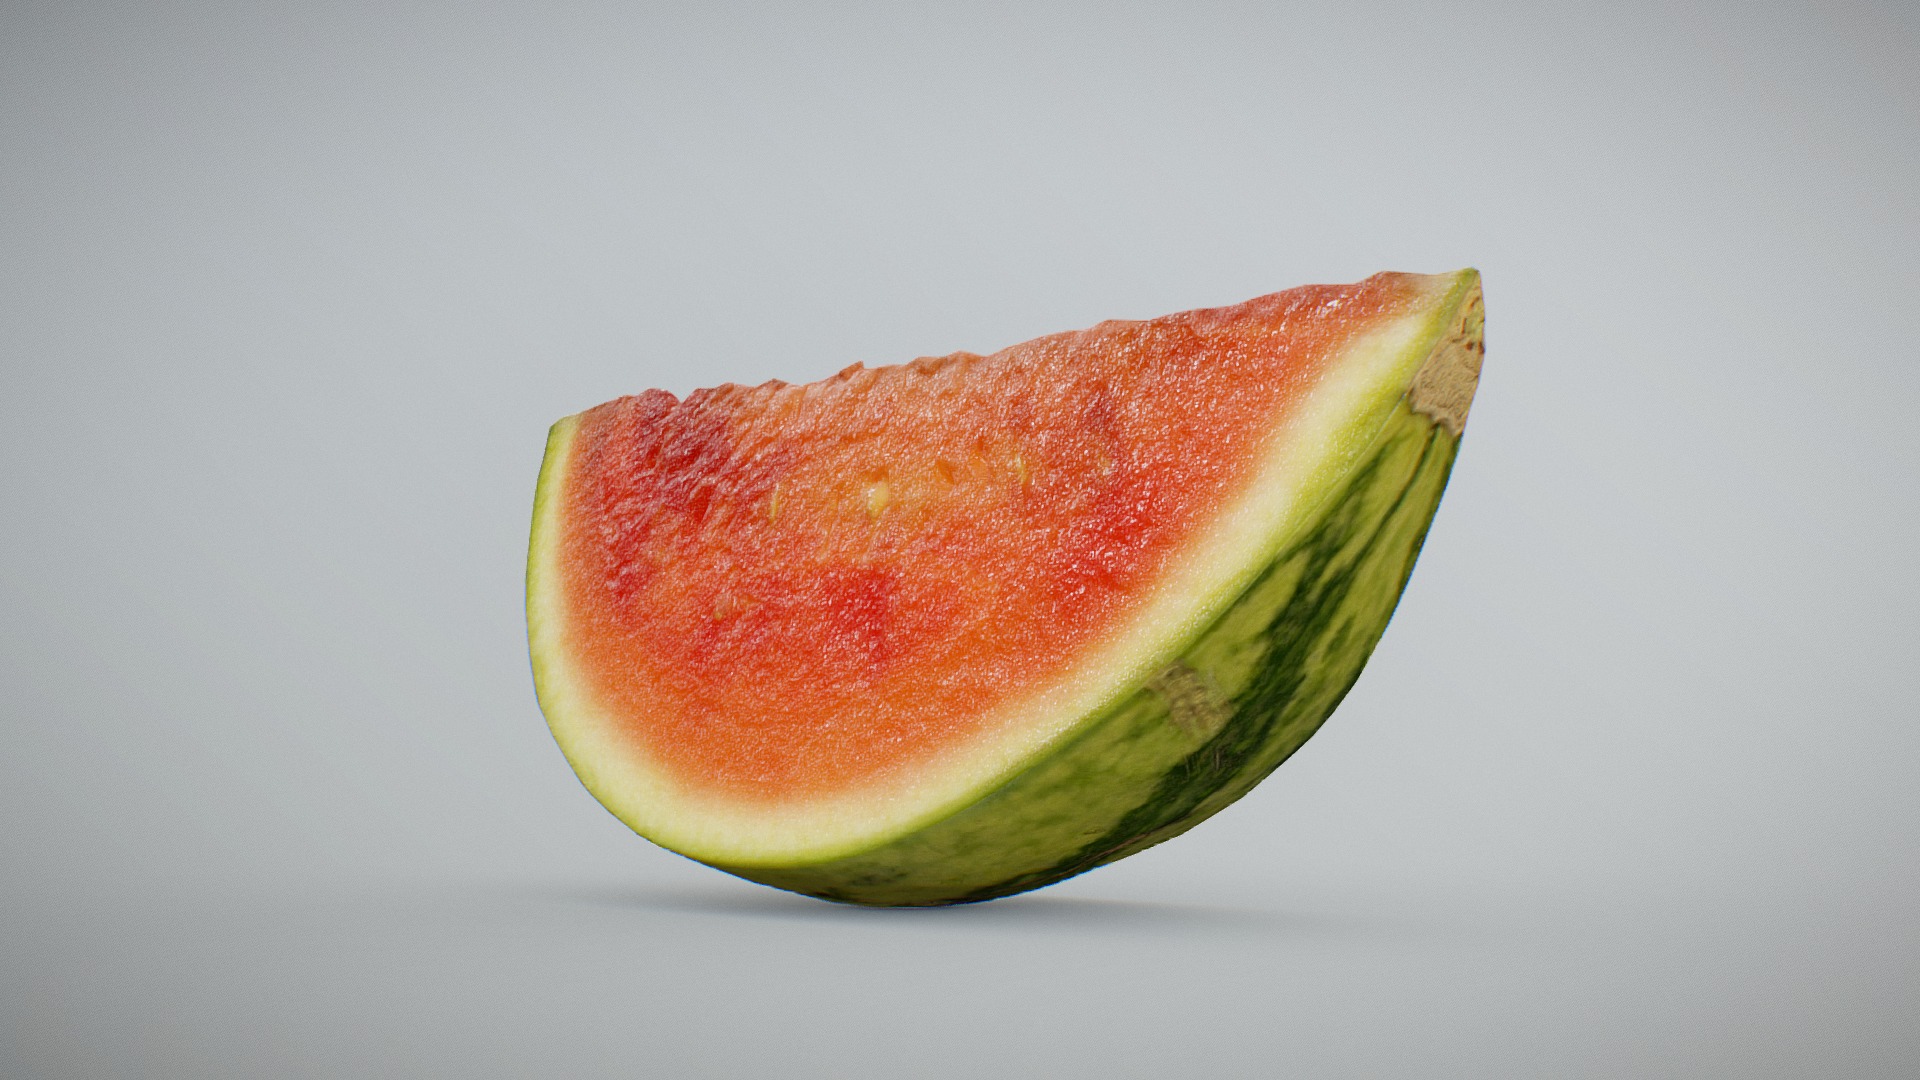 3D model Mini Watermelon Slice - This is a 3D model of the Mini Watermelon Slice. The 3D model is about a watermelon with a slice cut out.